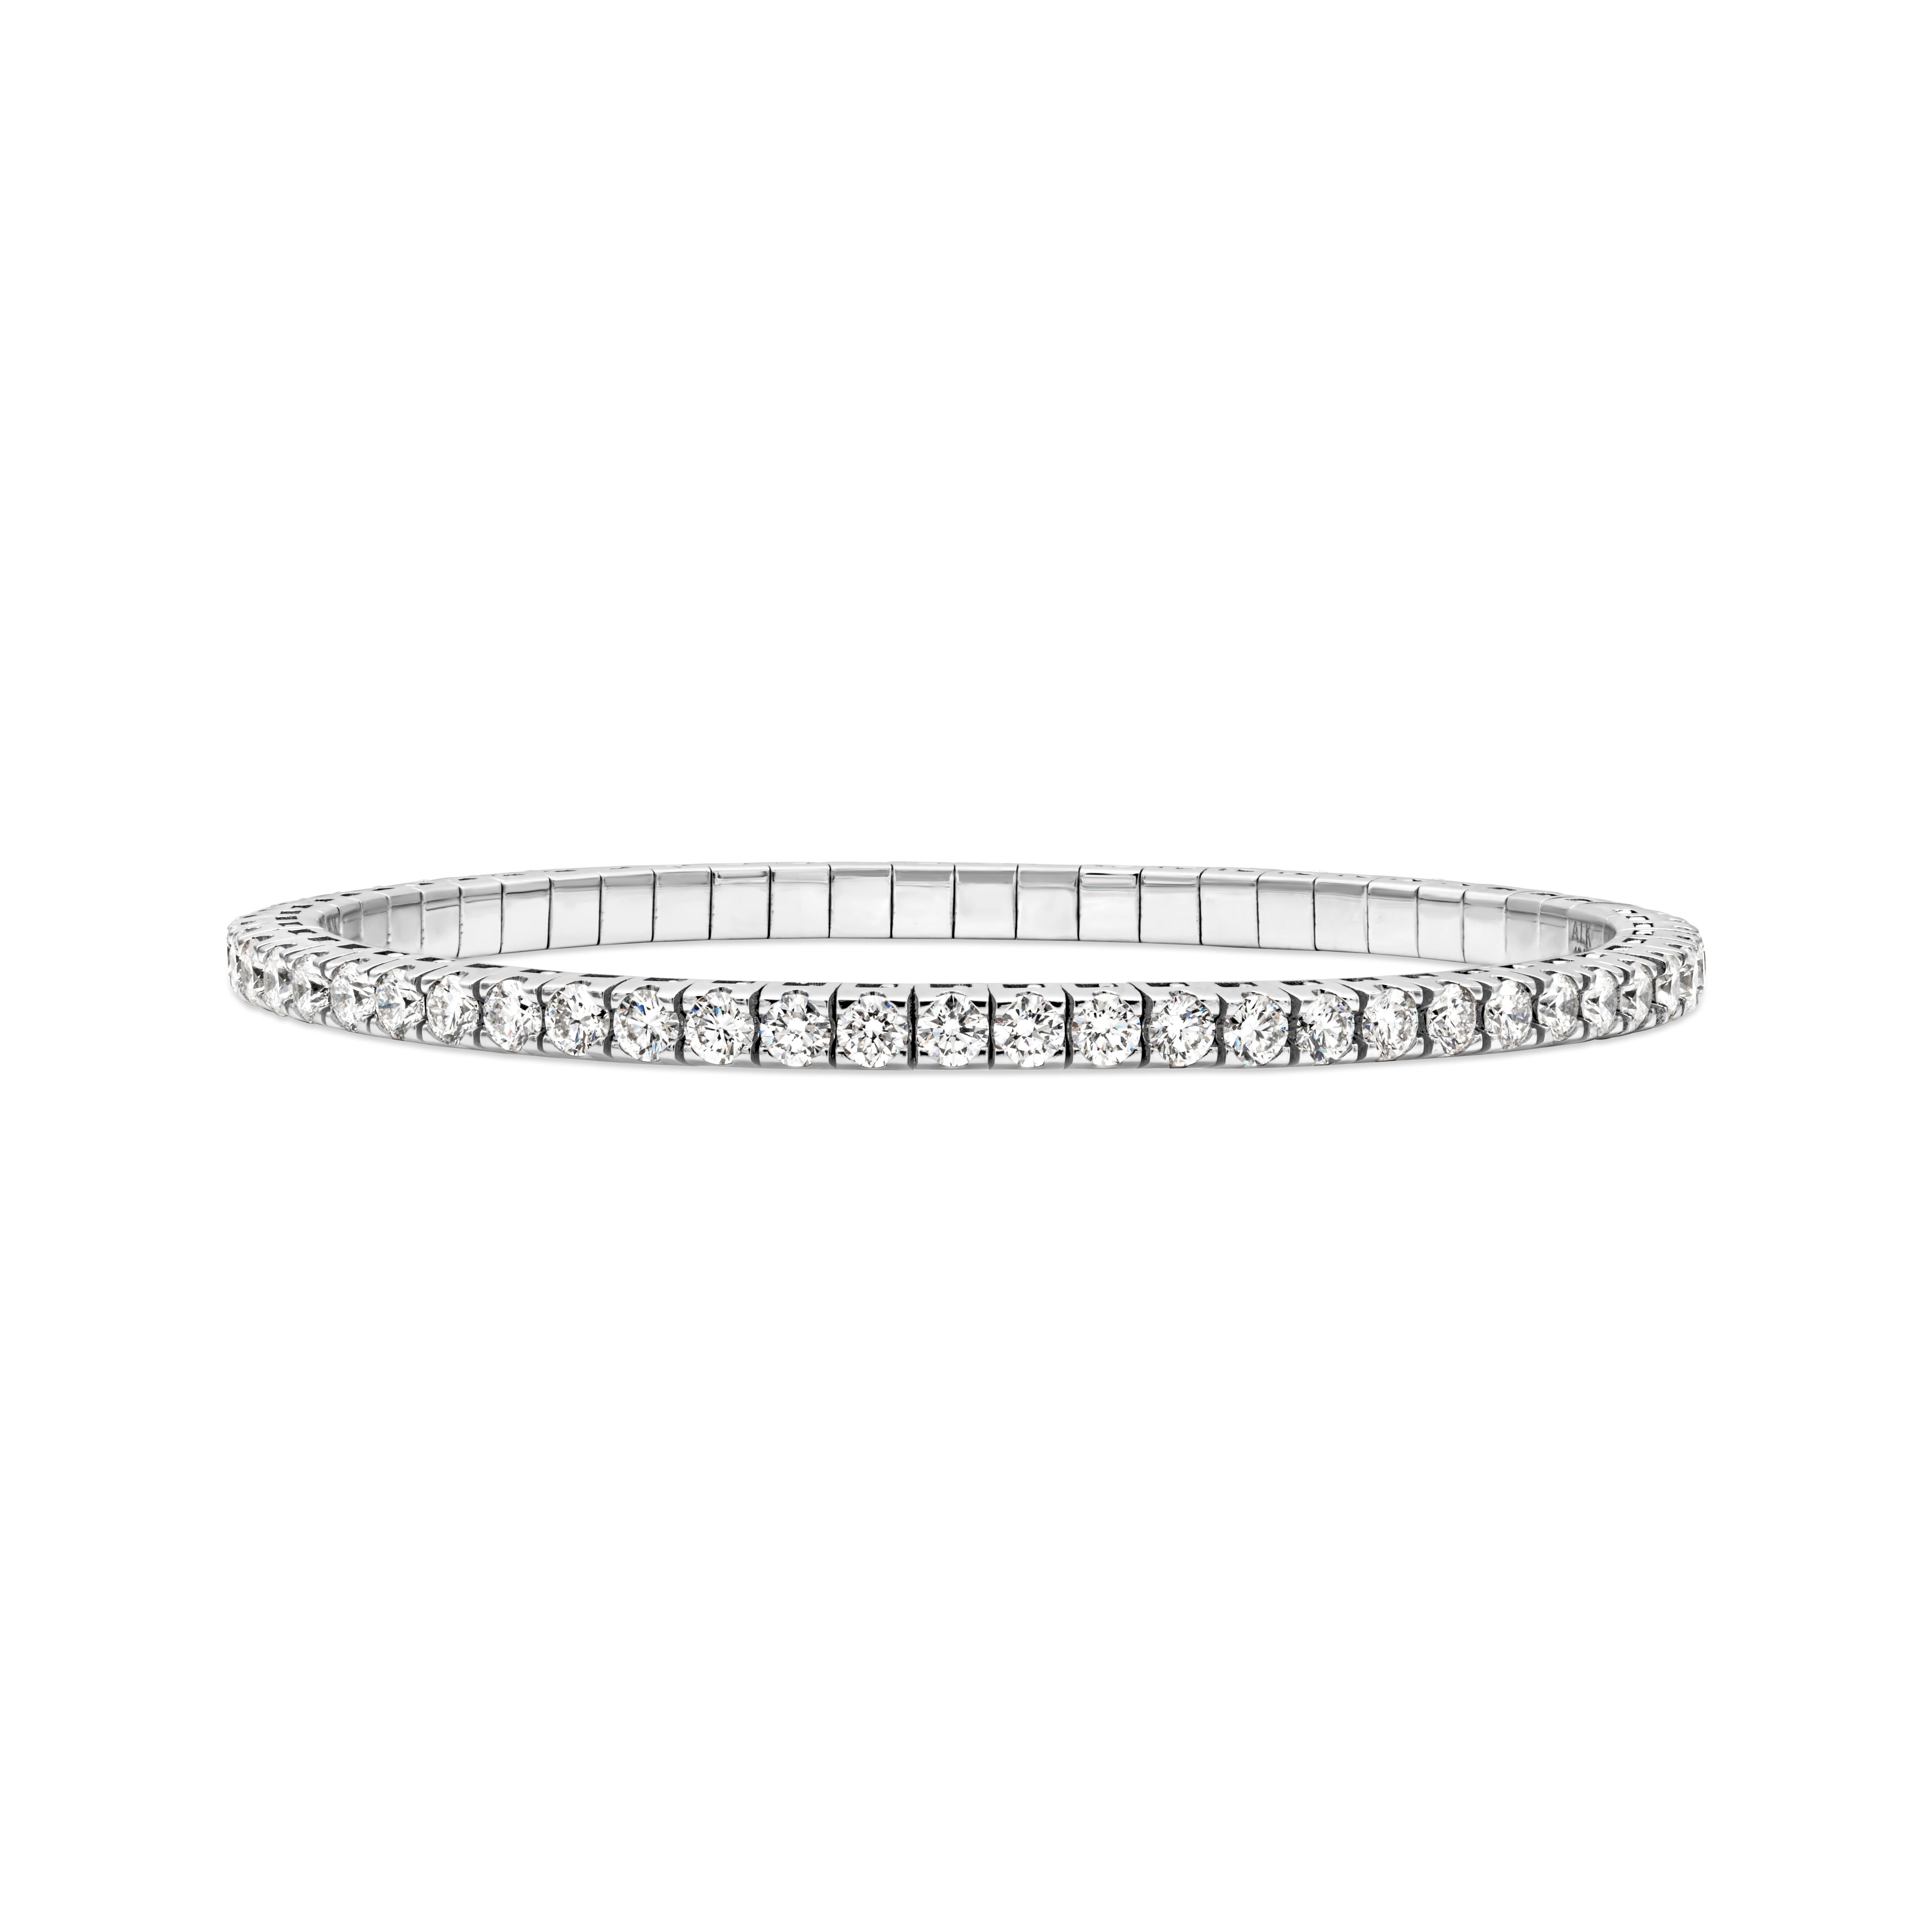 A timeless tennis bracelet showcasing a row of 60 round brilliant diamonds set in a stretchable 18k white gold mounting. Diamonds weigh 4.80 carats total, F color and VS2-SI1 in clarity. 7 inches in length.

Roman Malakov is a custom house,